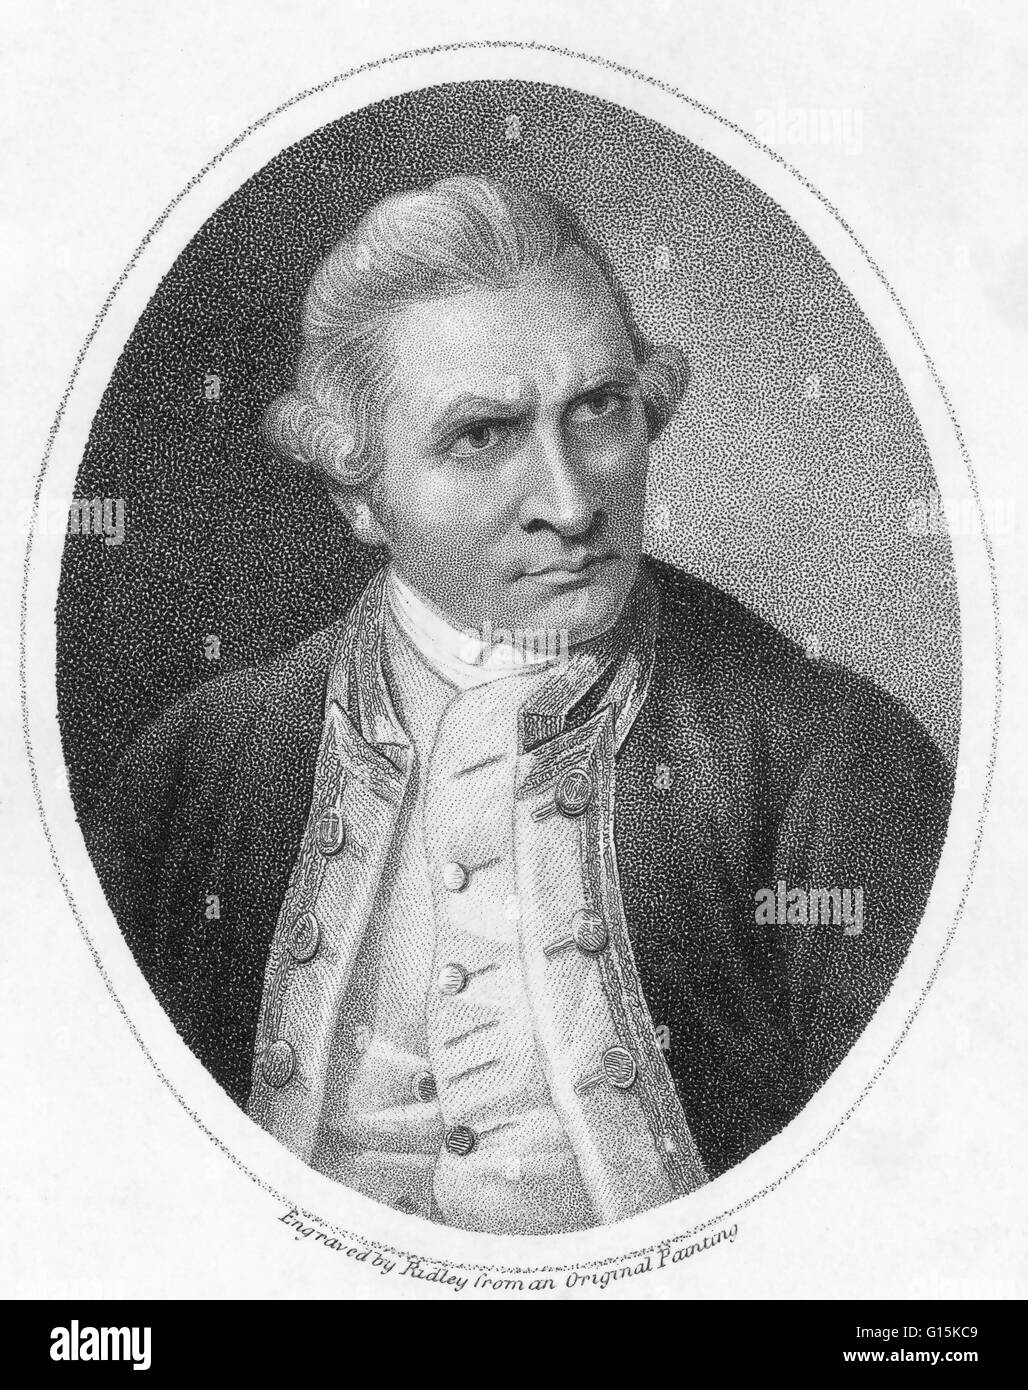 Captain James Cook (1728-1779), British explorer. After joining the Royal Navy, Cook undertook his first major voyage from 1768-71, accurately mapping New Zealand's coastline and making the first European landing in east Australia. During 1772-75 he cross Stock Photo